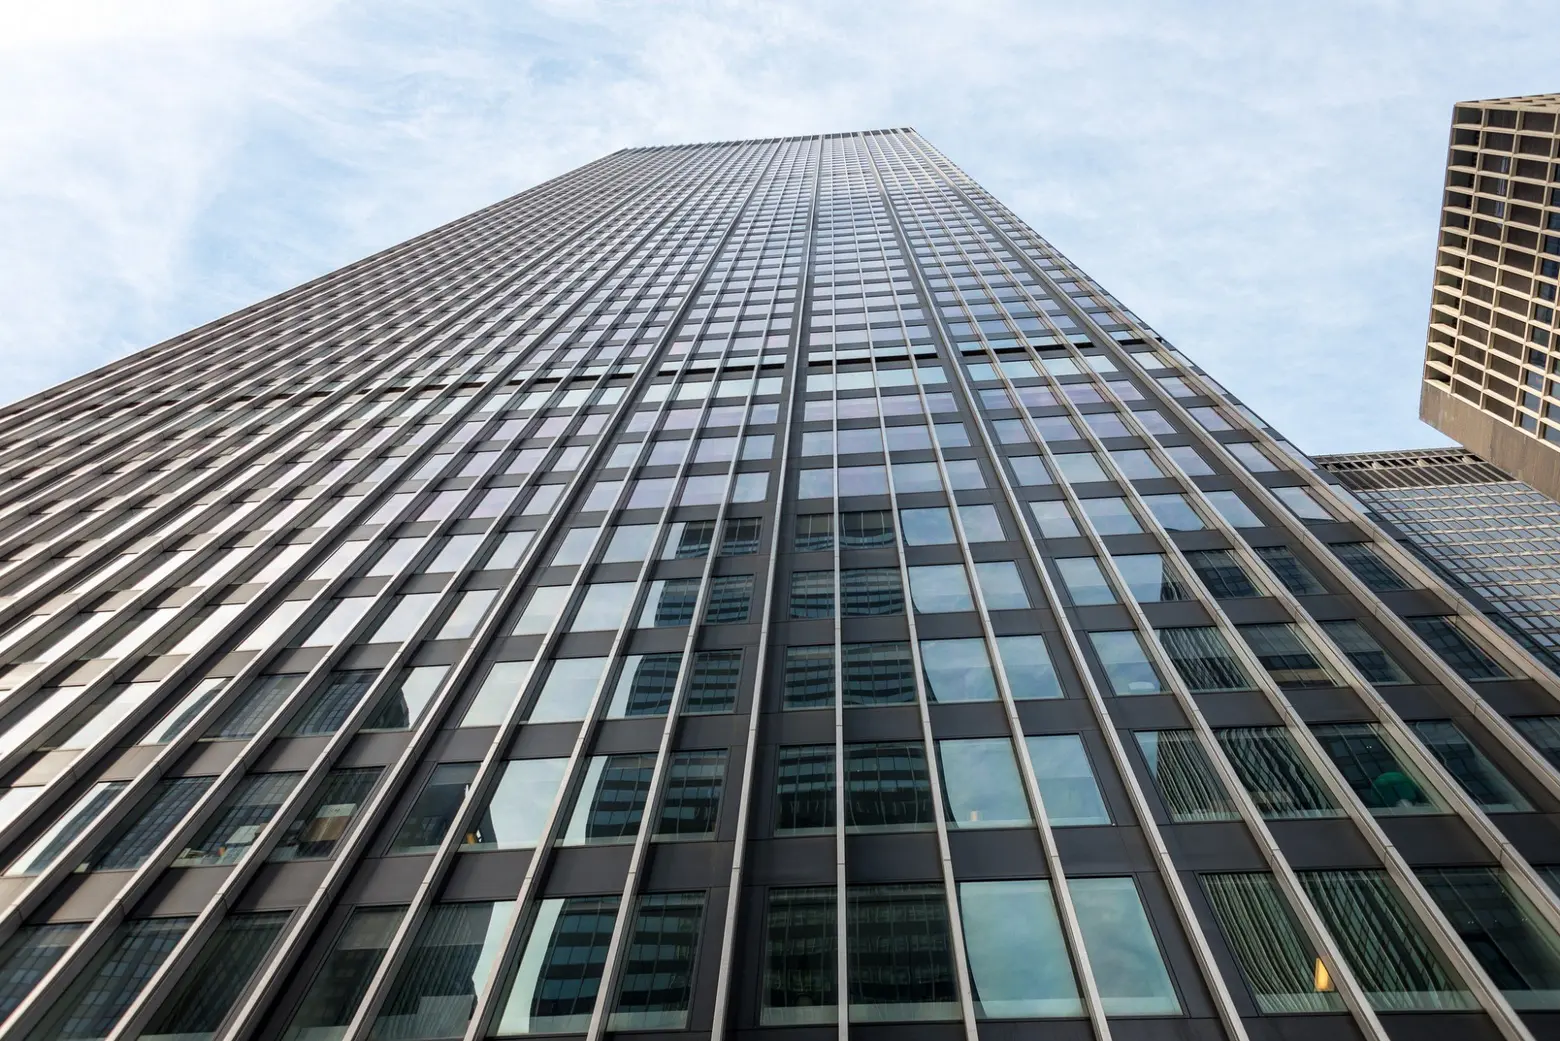 JPMorgan Chase will revise design of 270 Park Avenue tower to increase open public space